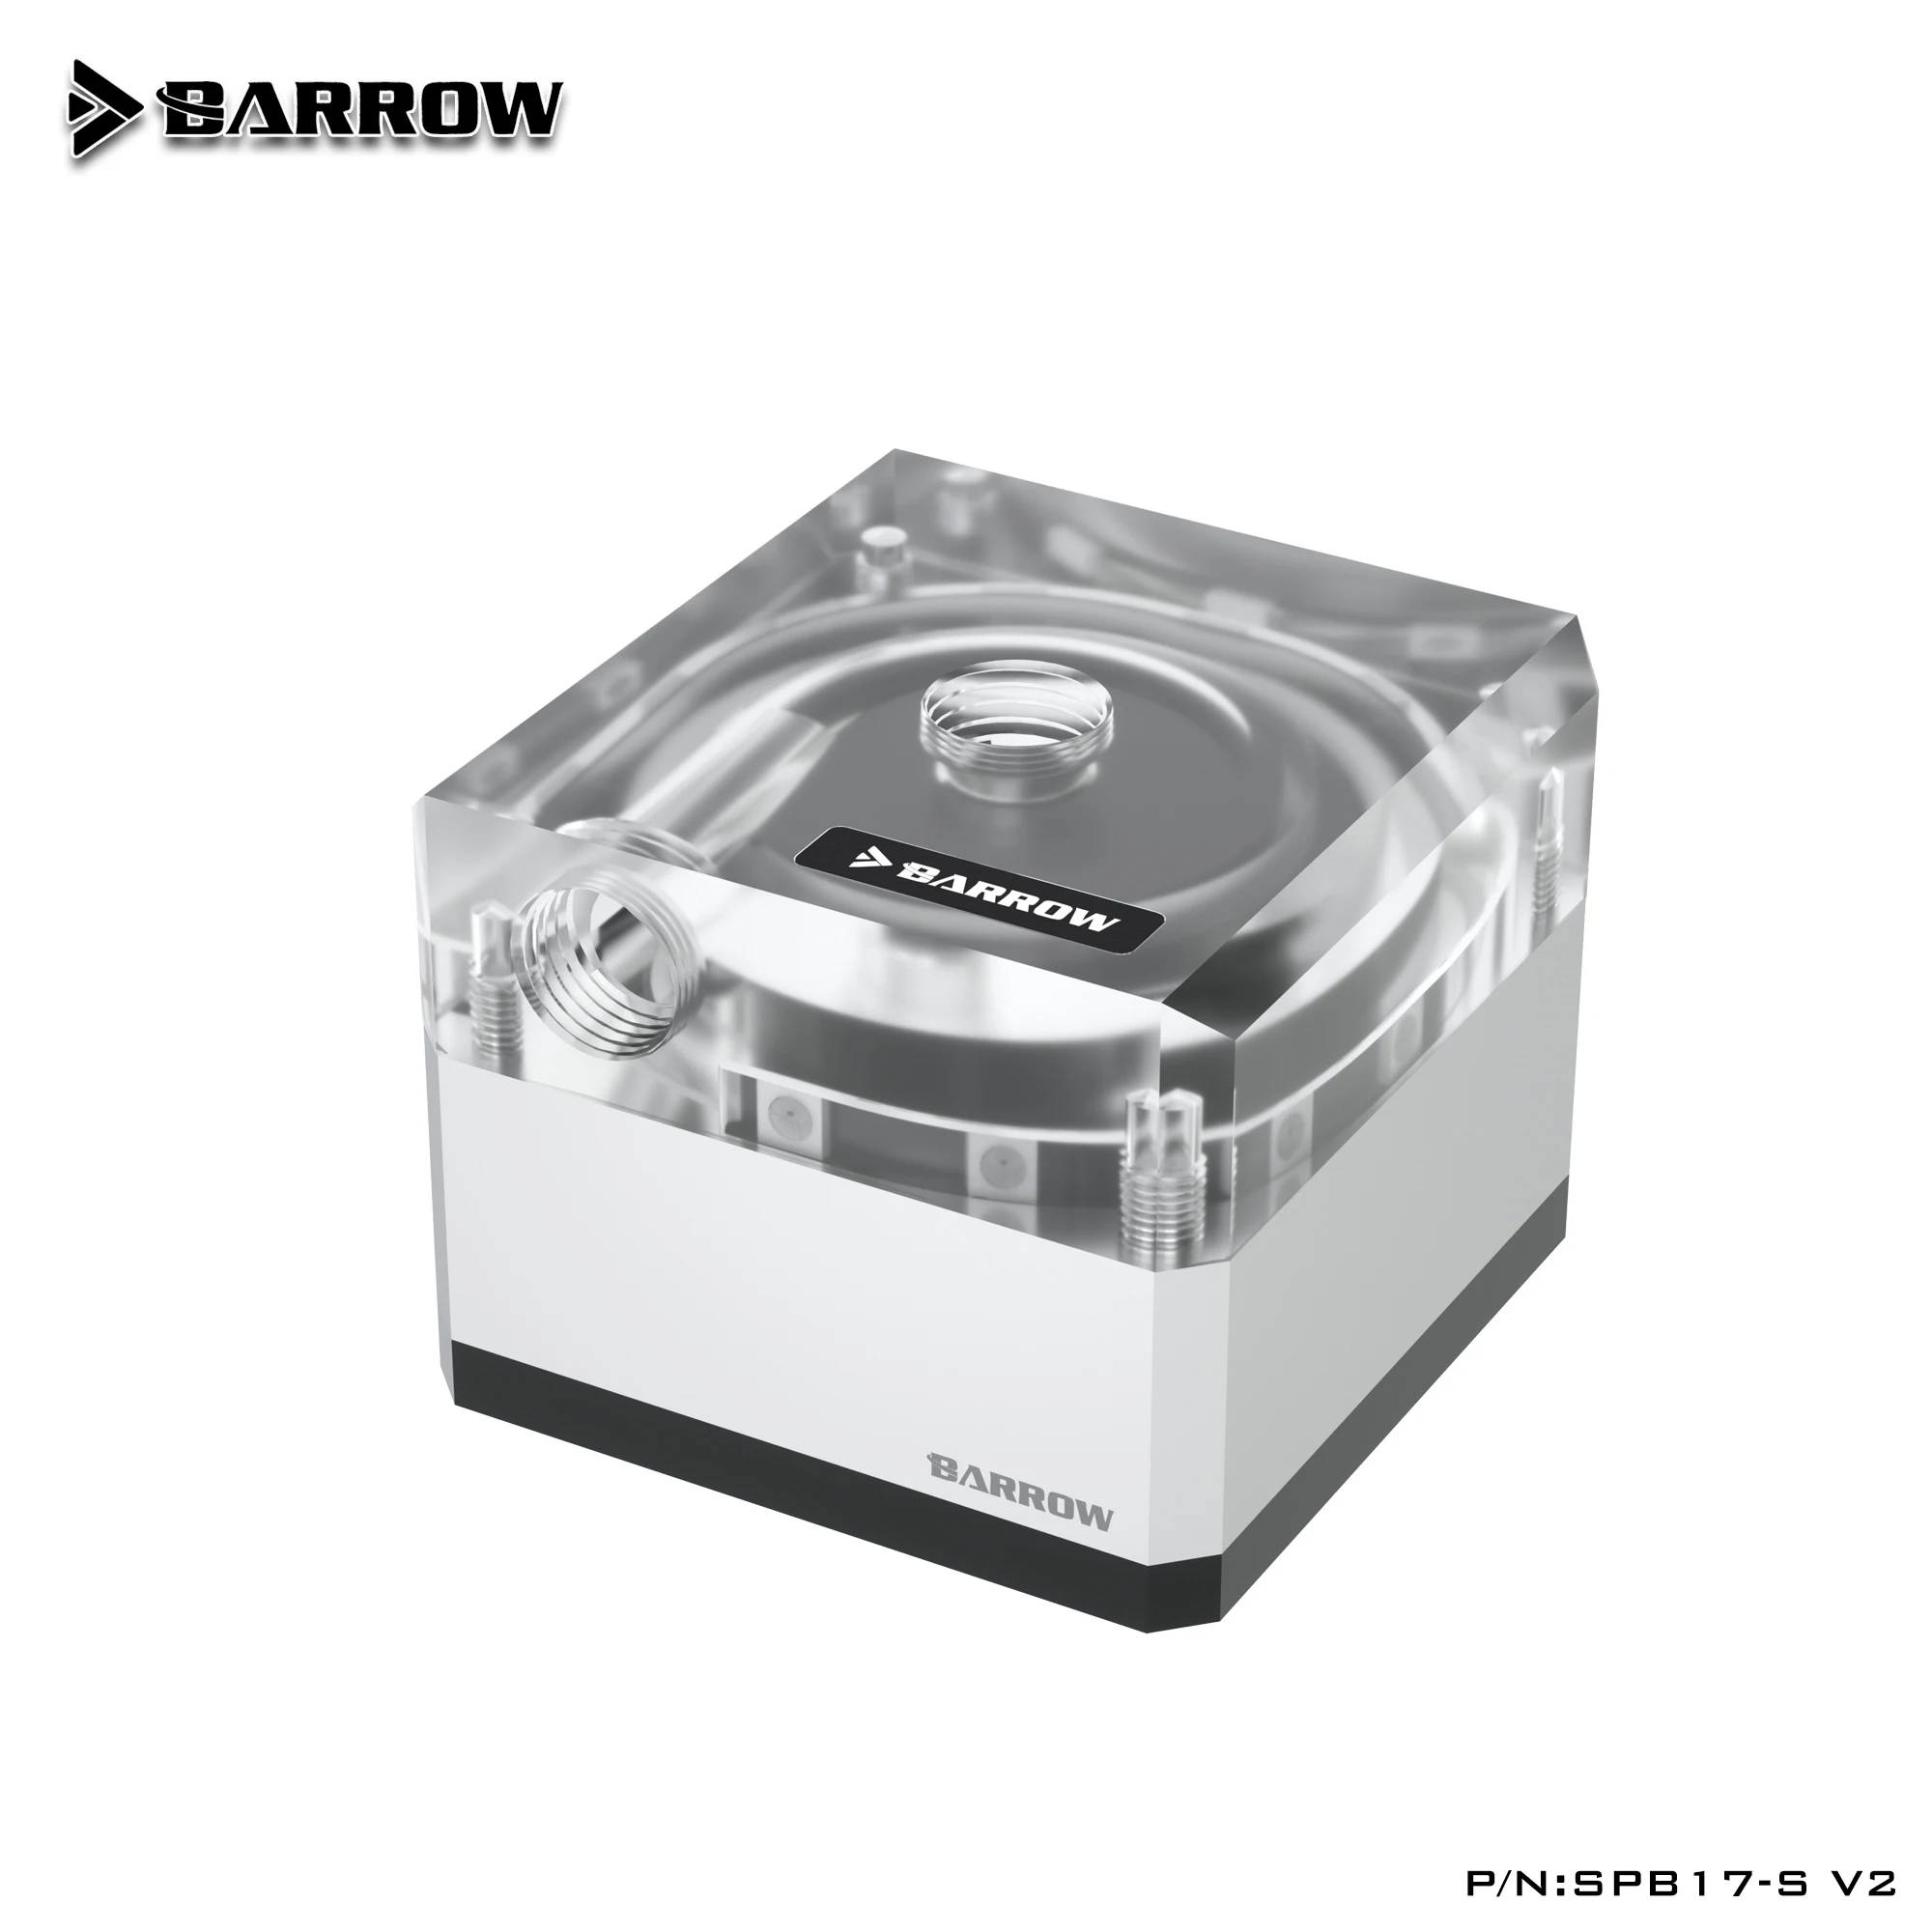 Barrow SPB17-S-V2, 17W PWM Pumps, LRC 2.0, DDC Series, Metal Shell, Manual And PWM Speed Control Water Cooling Pump enlarge